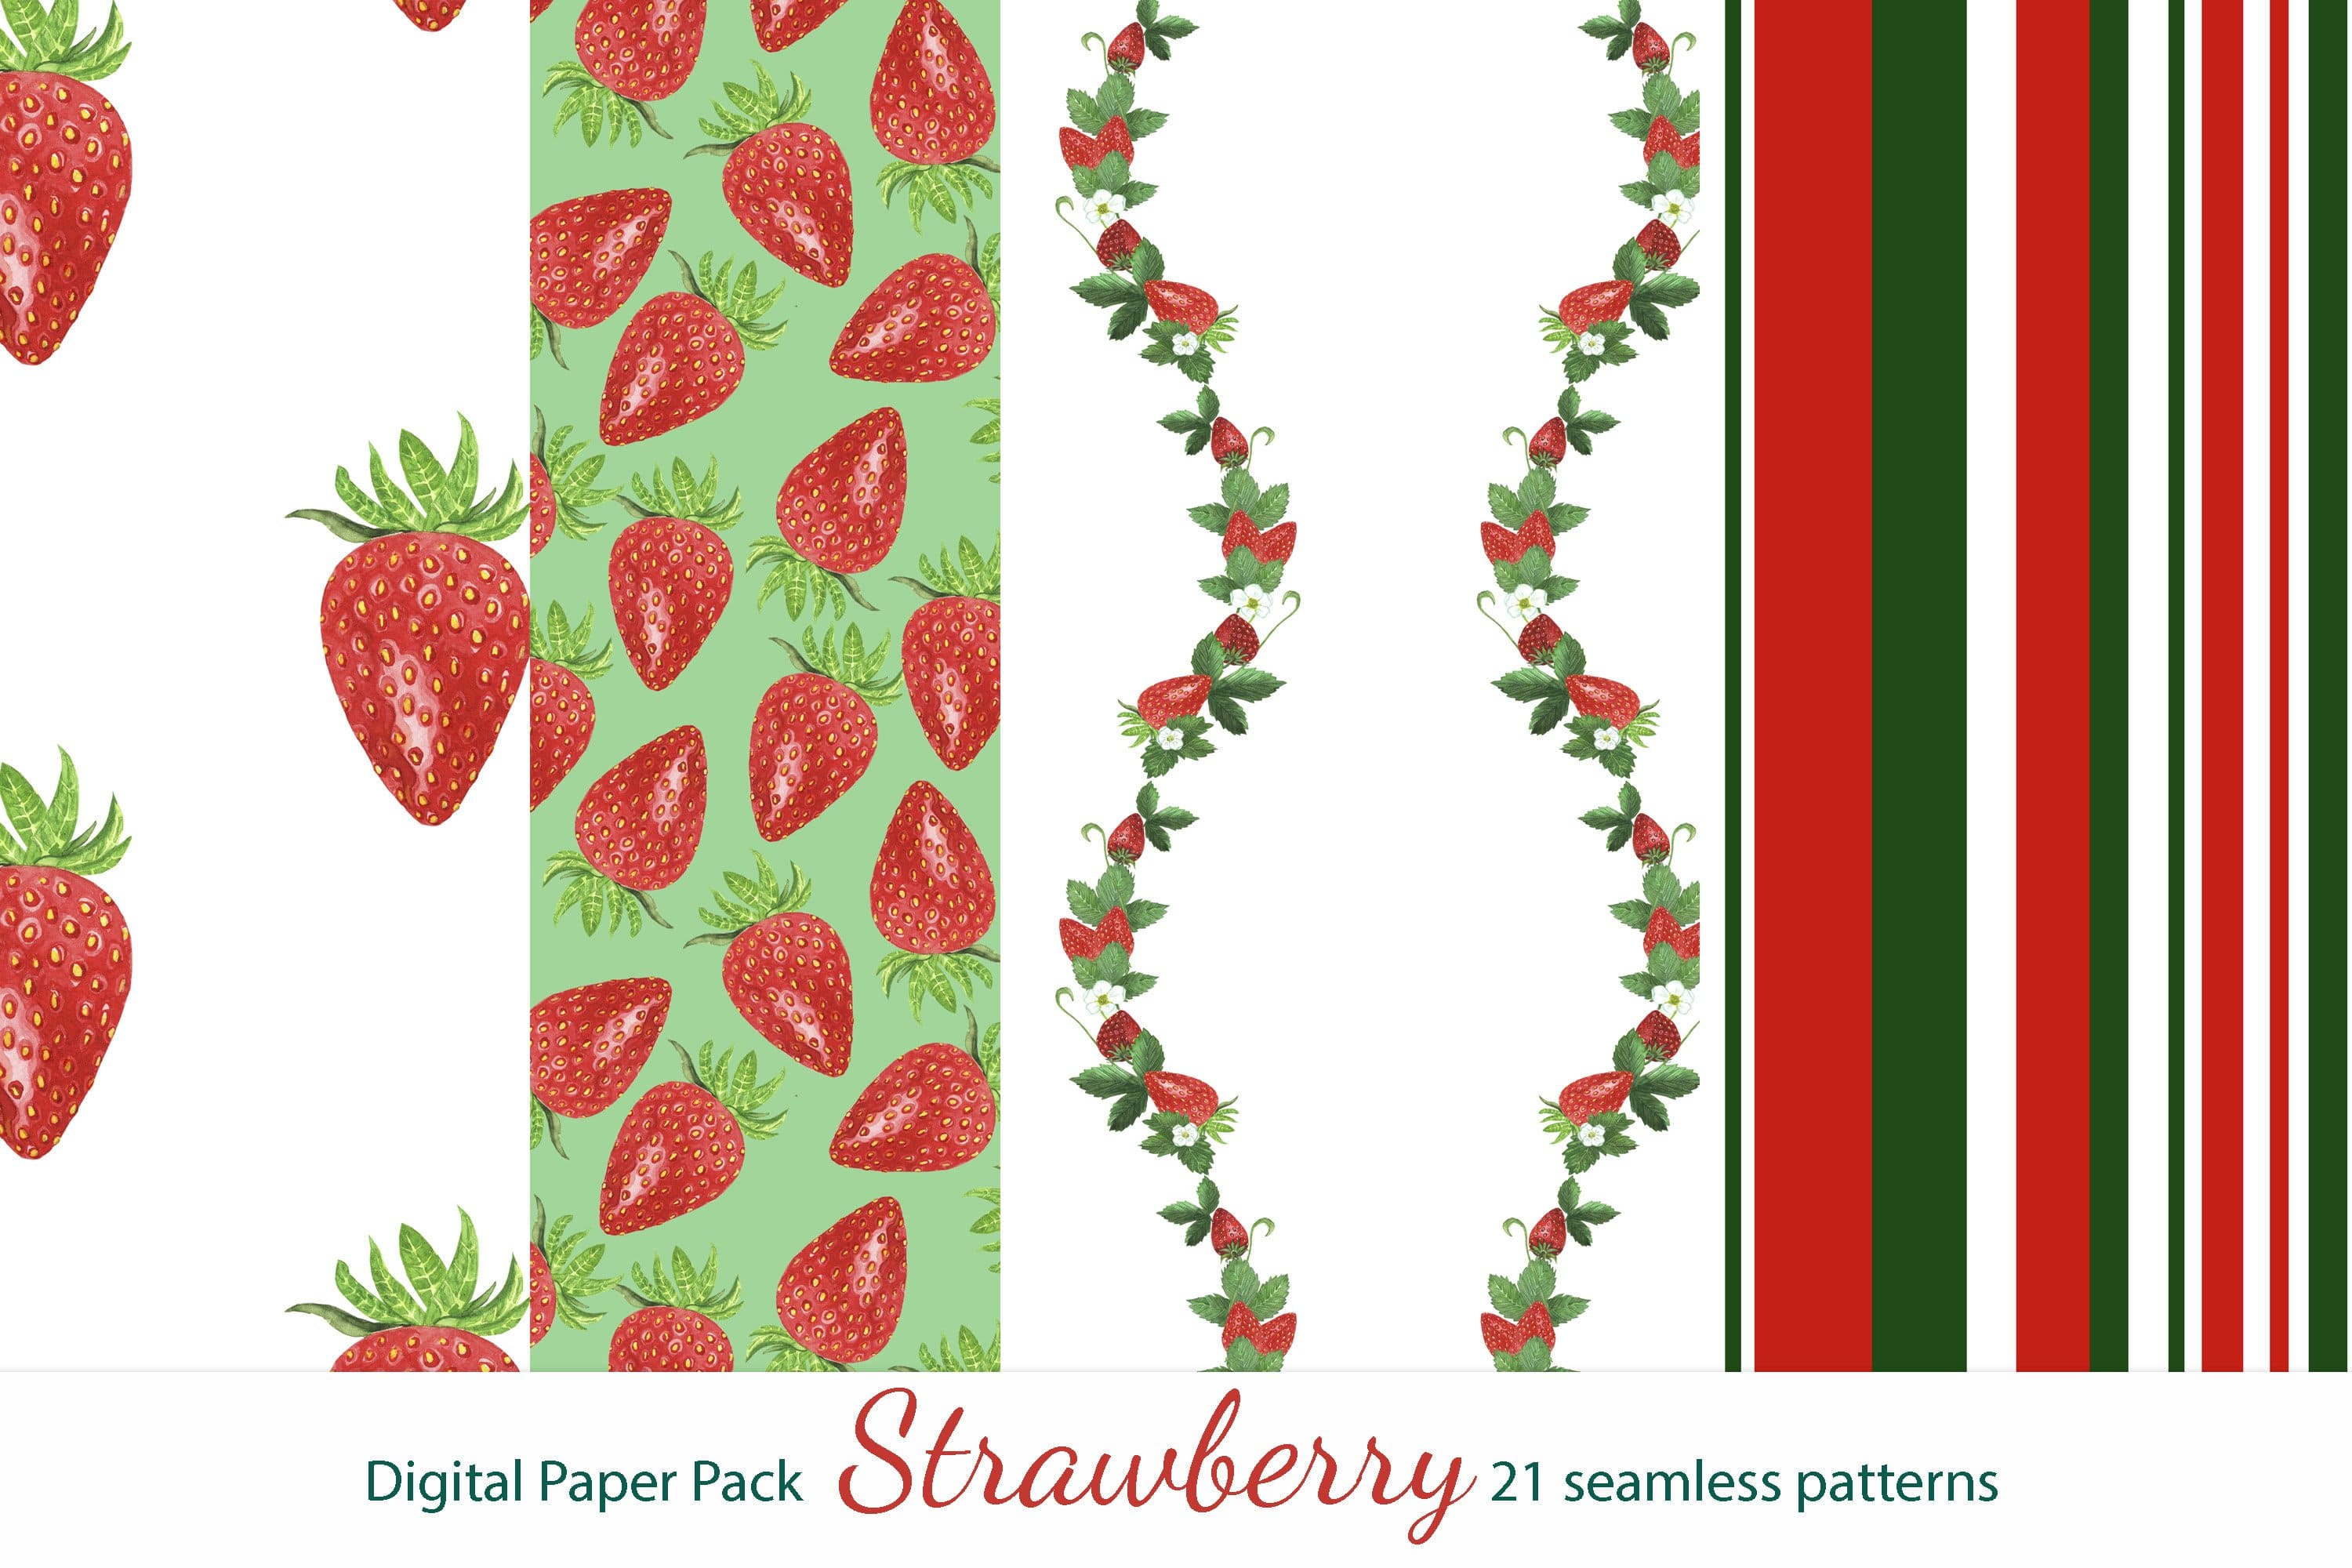 Strawberry digital paper pack in green, red and white.